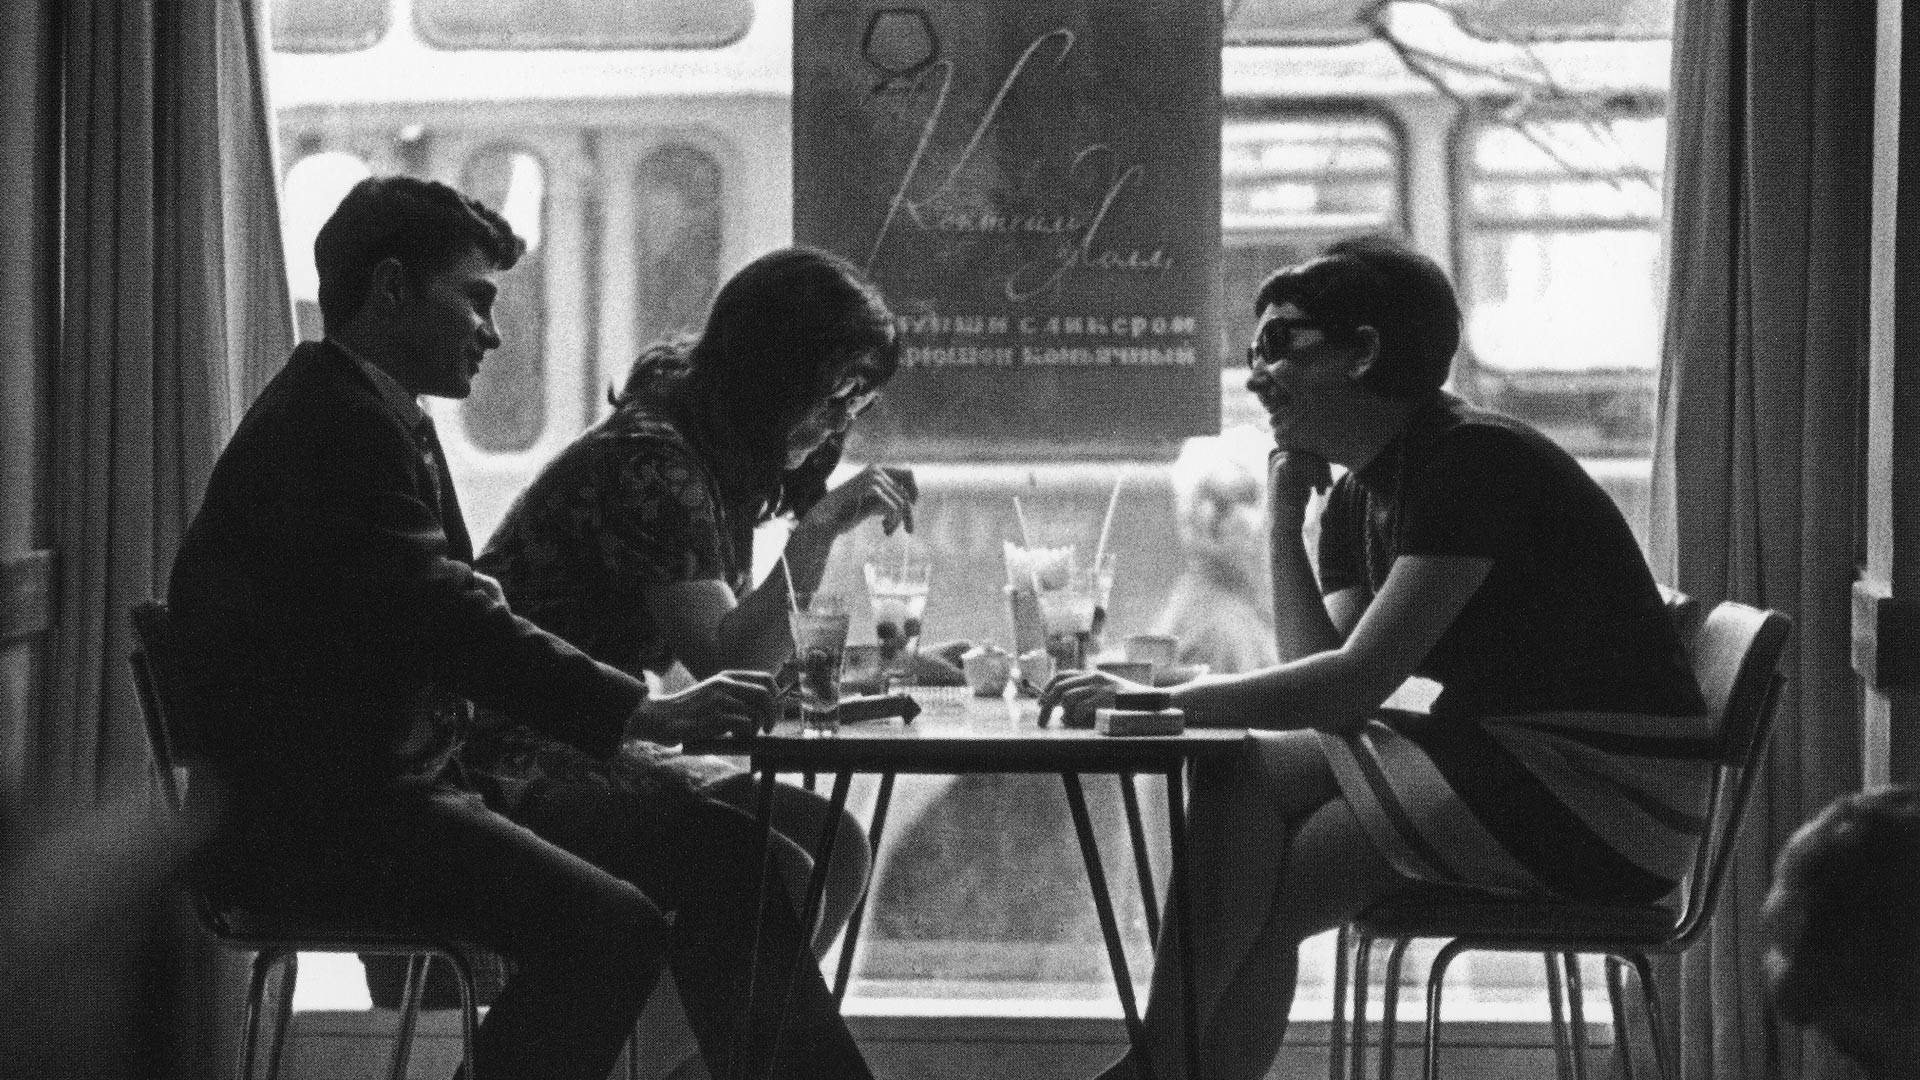 Youth in Moscow, USSR, drinking cocktails in a western style cafe 